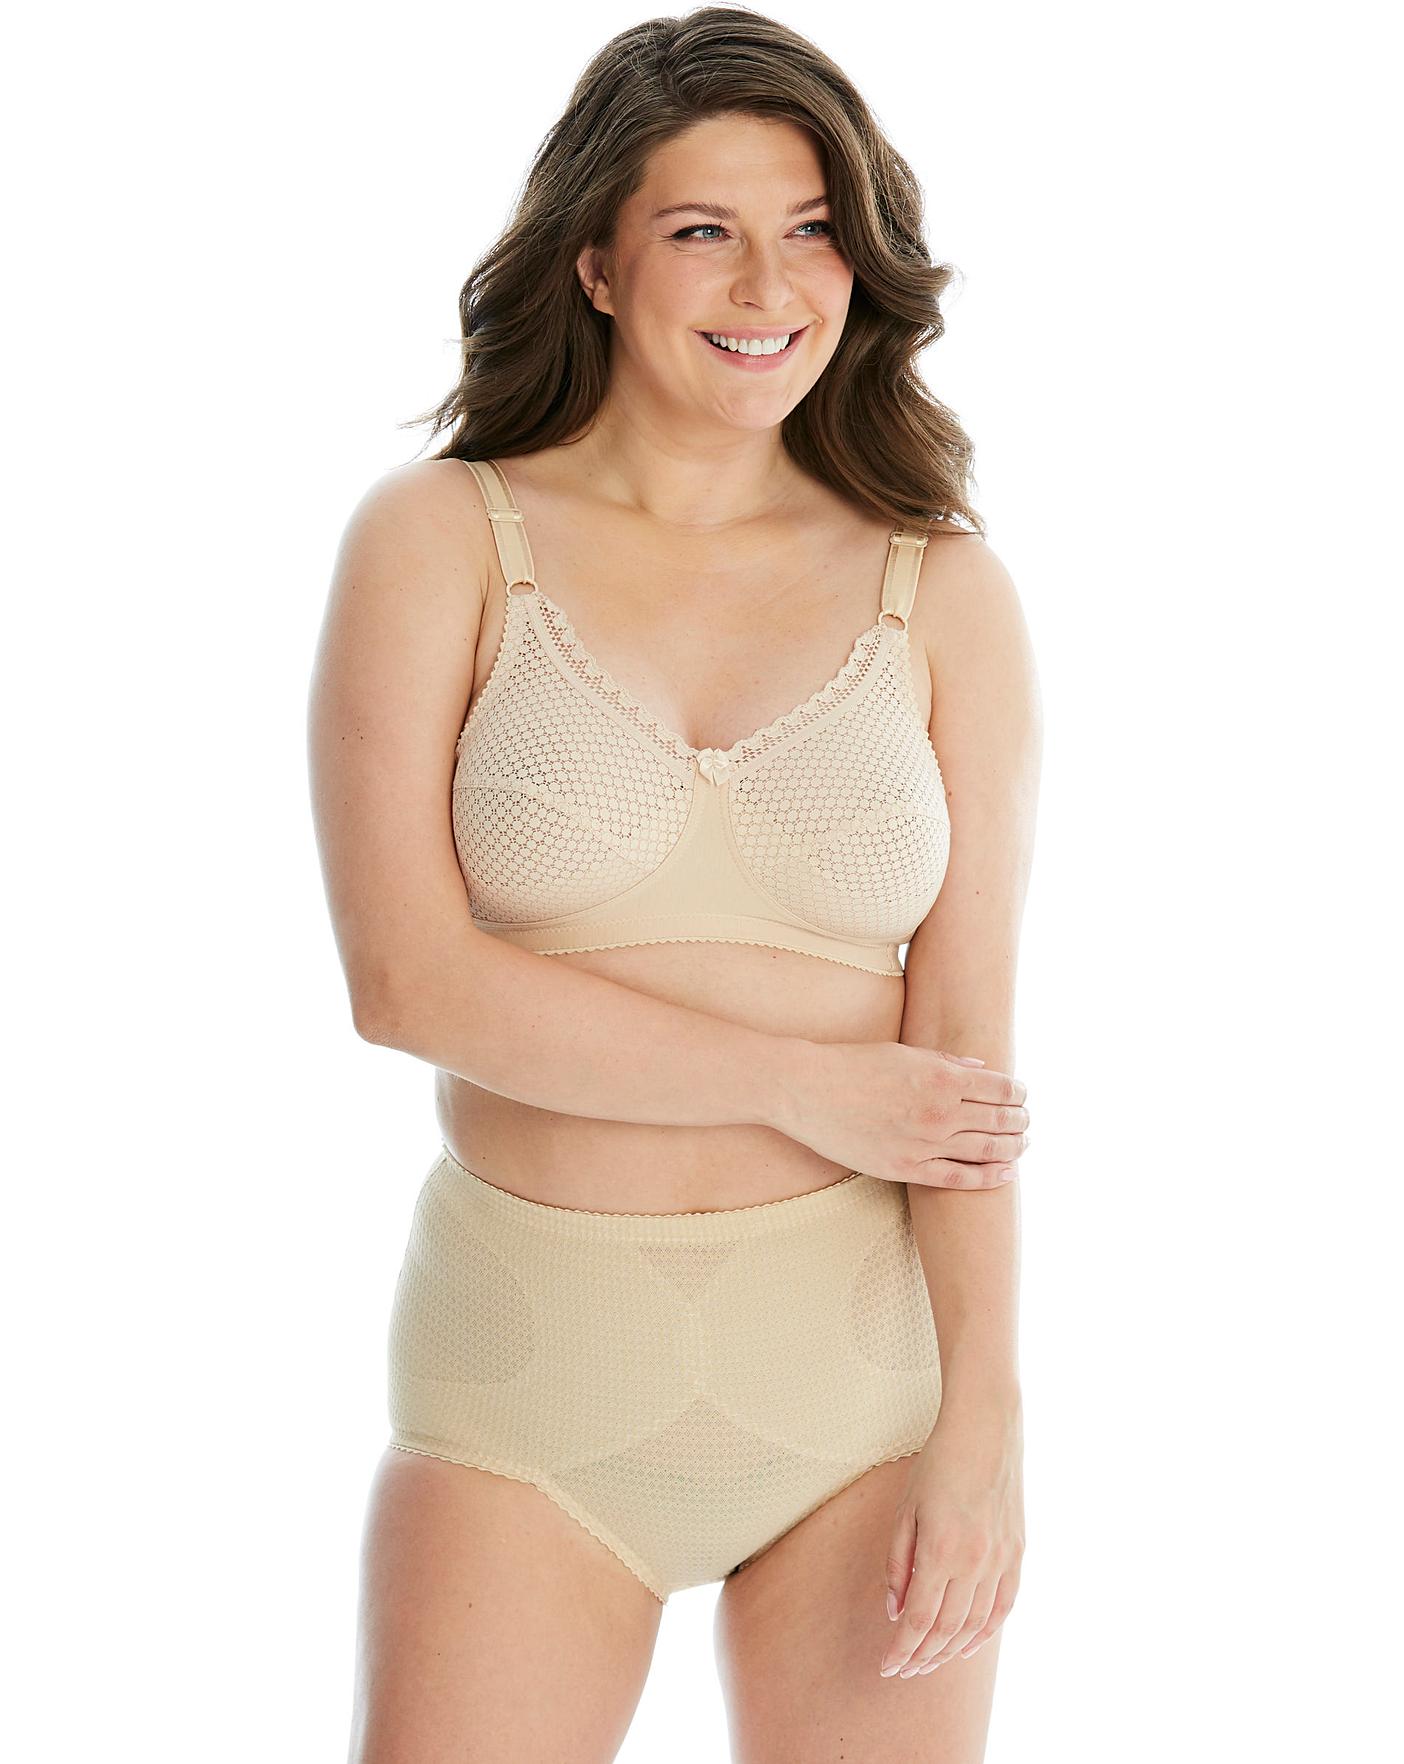 Soft Lace Underwired Support Bra by Miss Mary